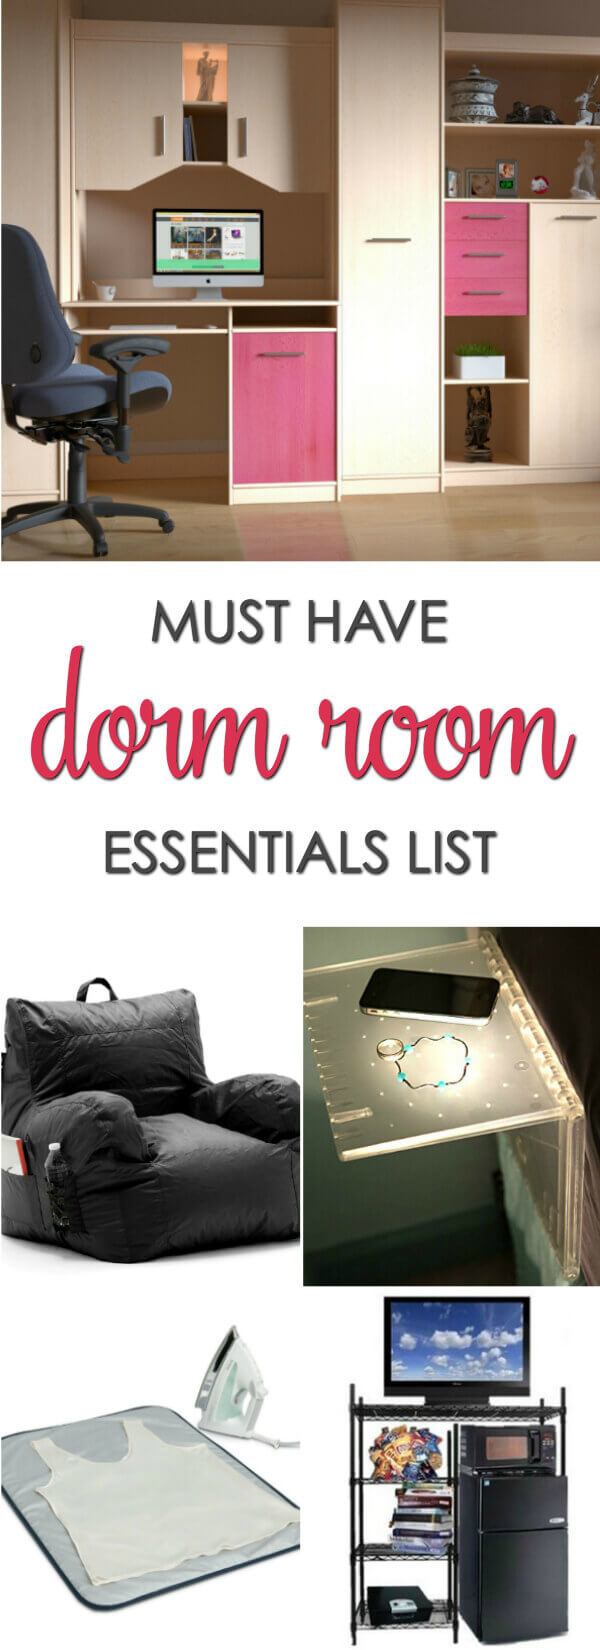 Must Have Dorm Room Essentials List - a great list of innovative and fun college dorm supplies